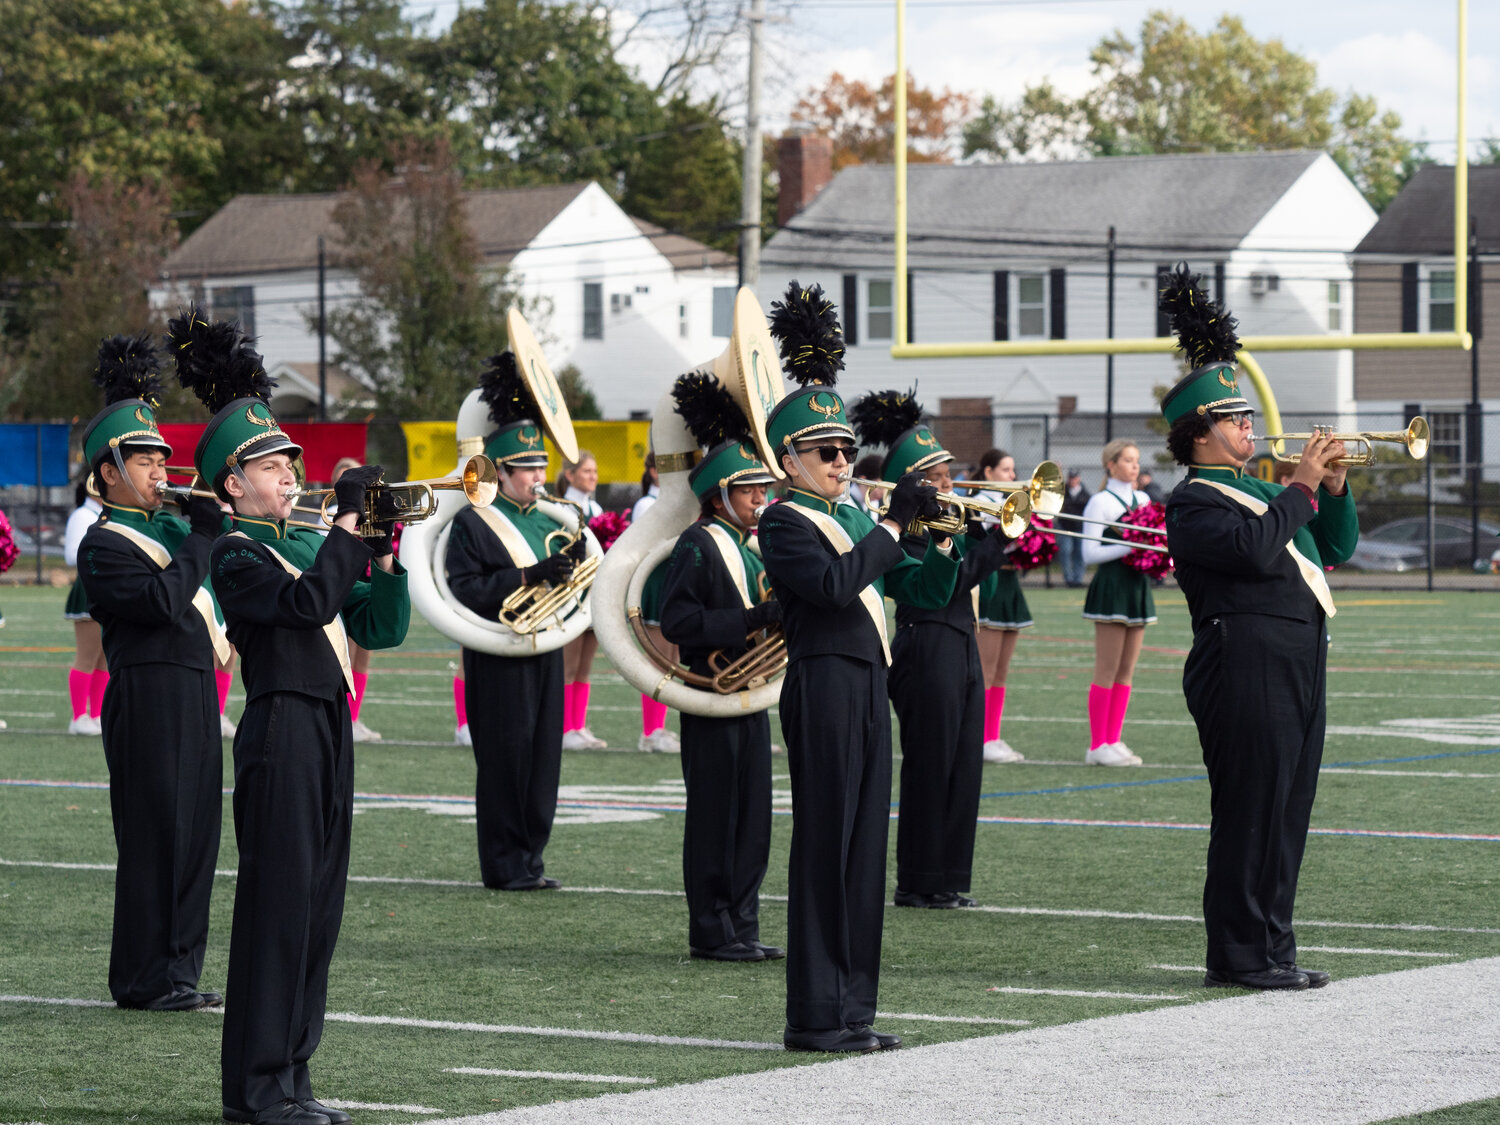 The marching band performed yet another great show during halftime.